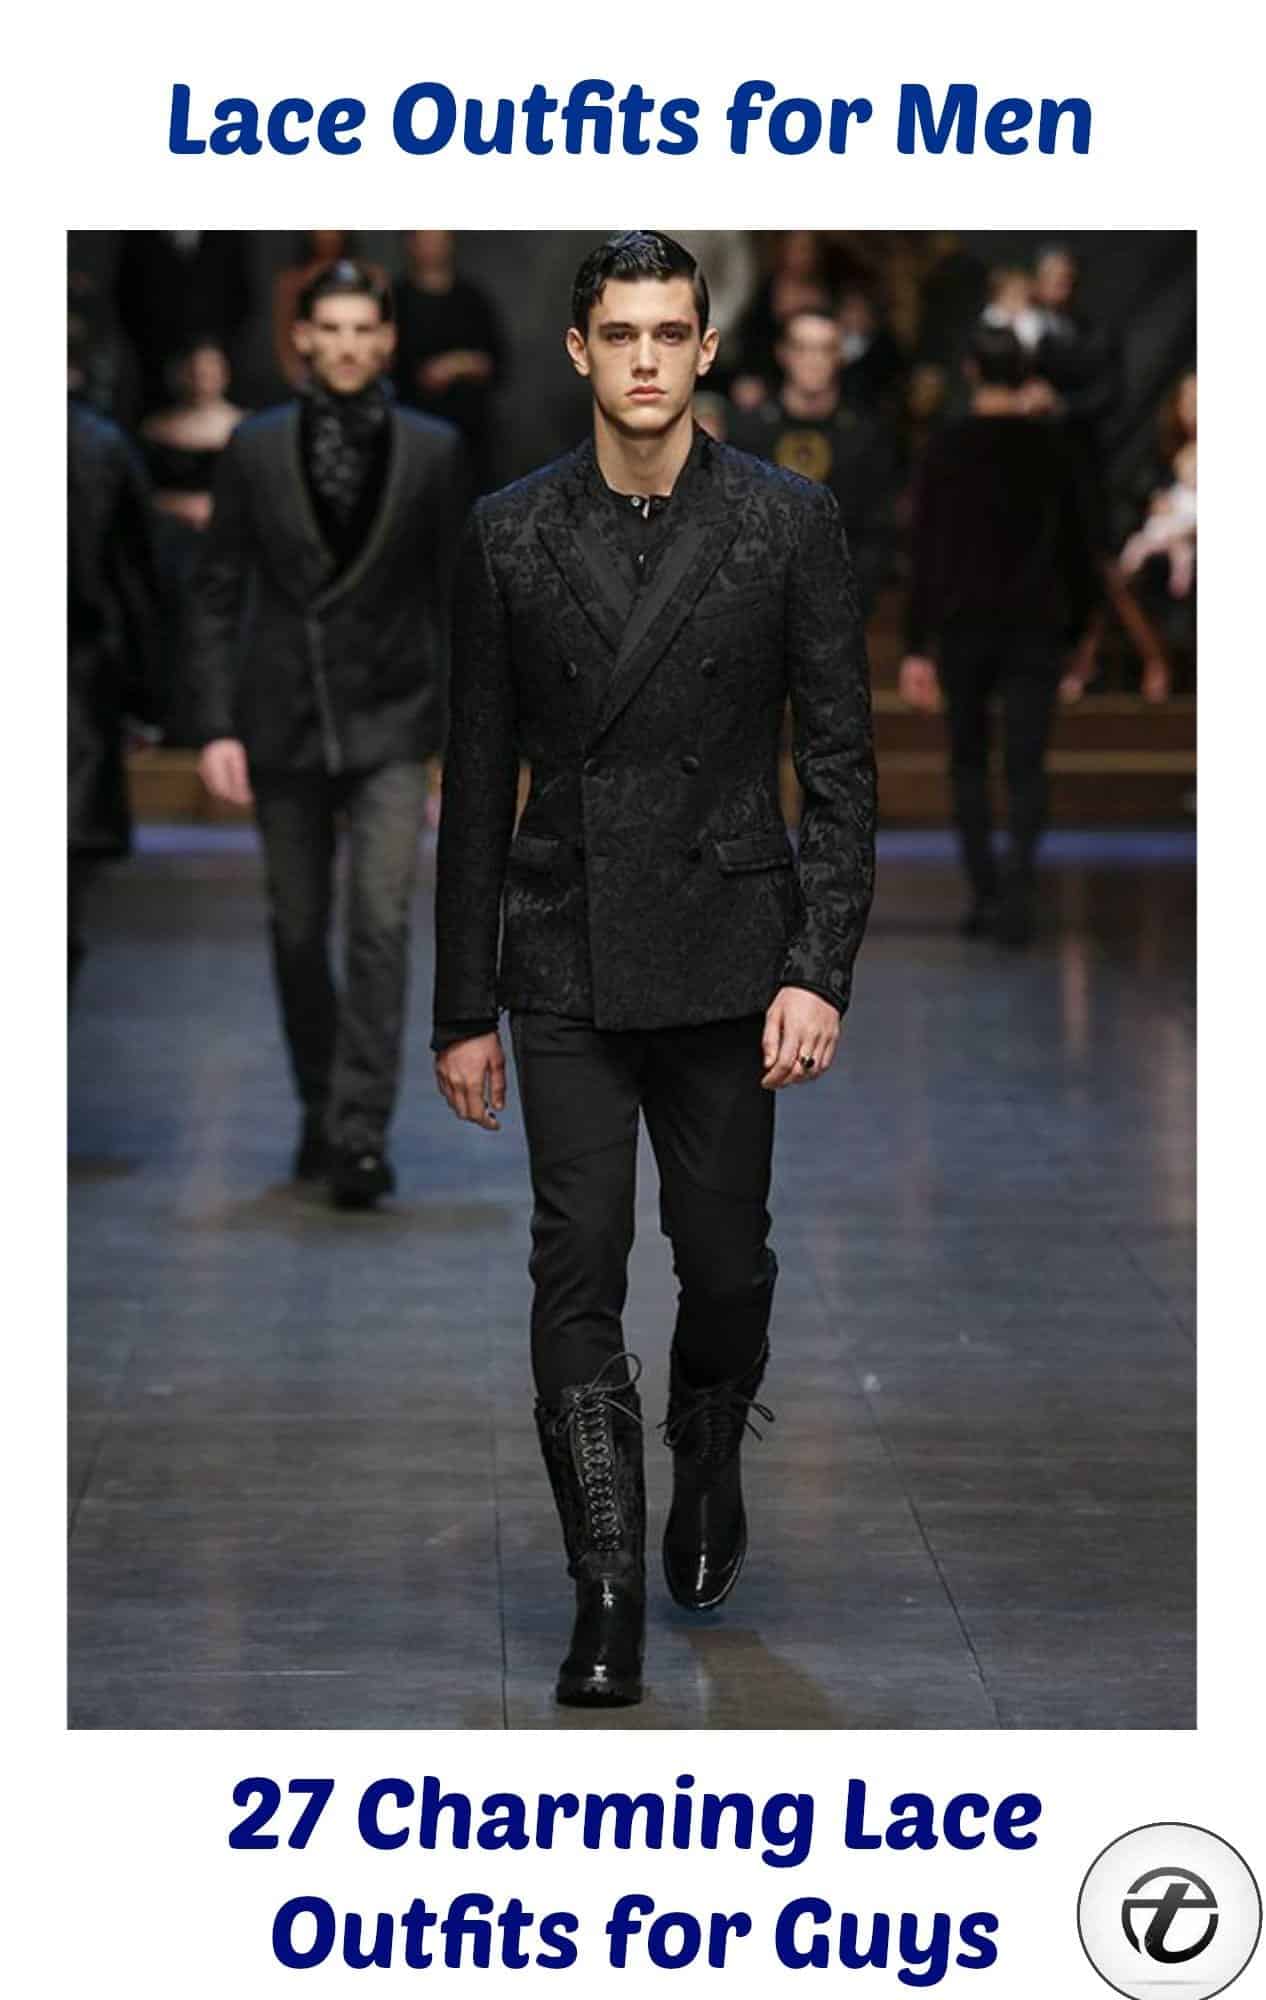 Lace Outfits for Men- 27 Best Ways to Wear Guys Lace Outfits